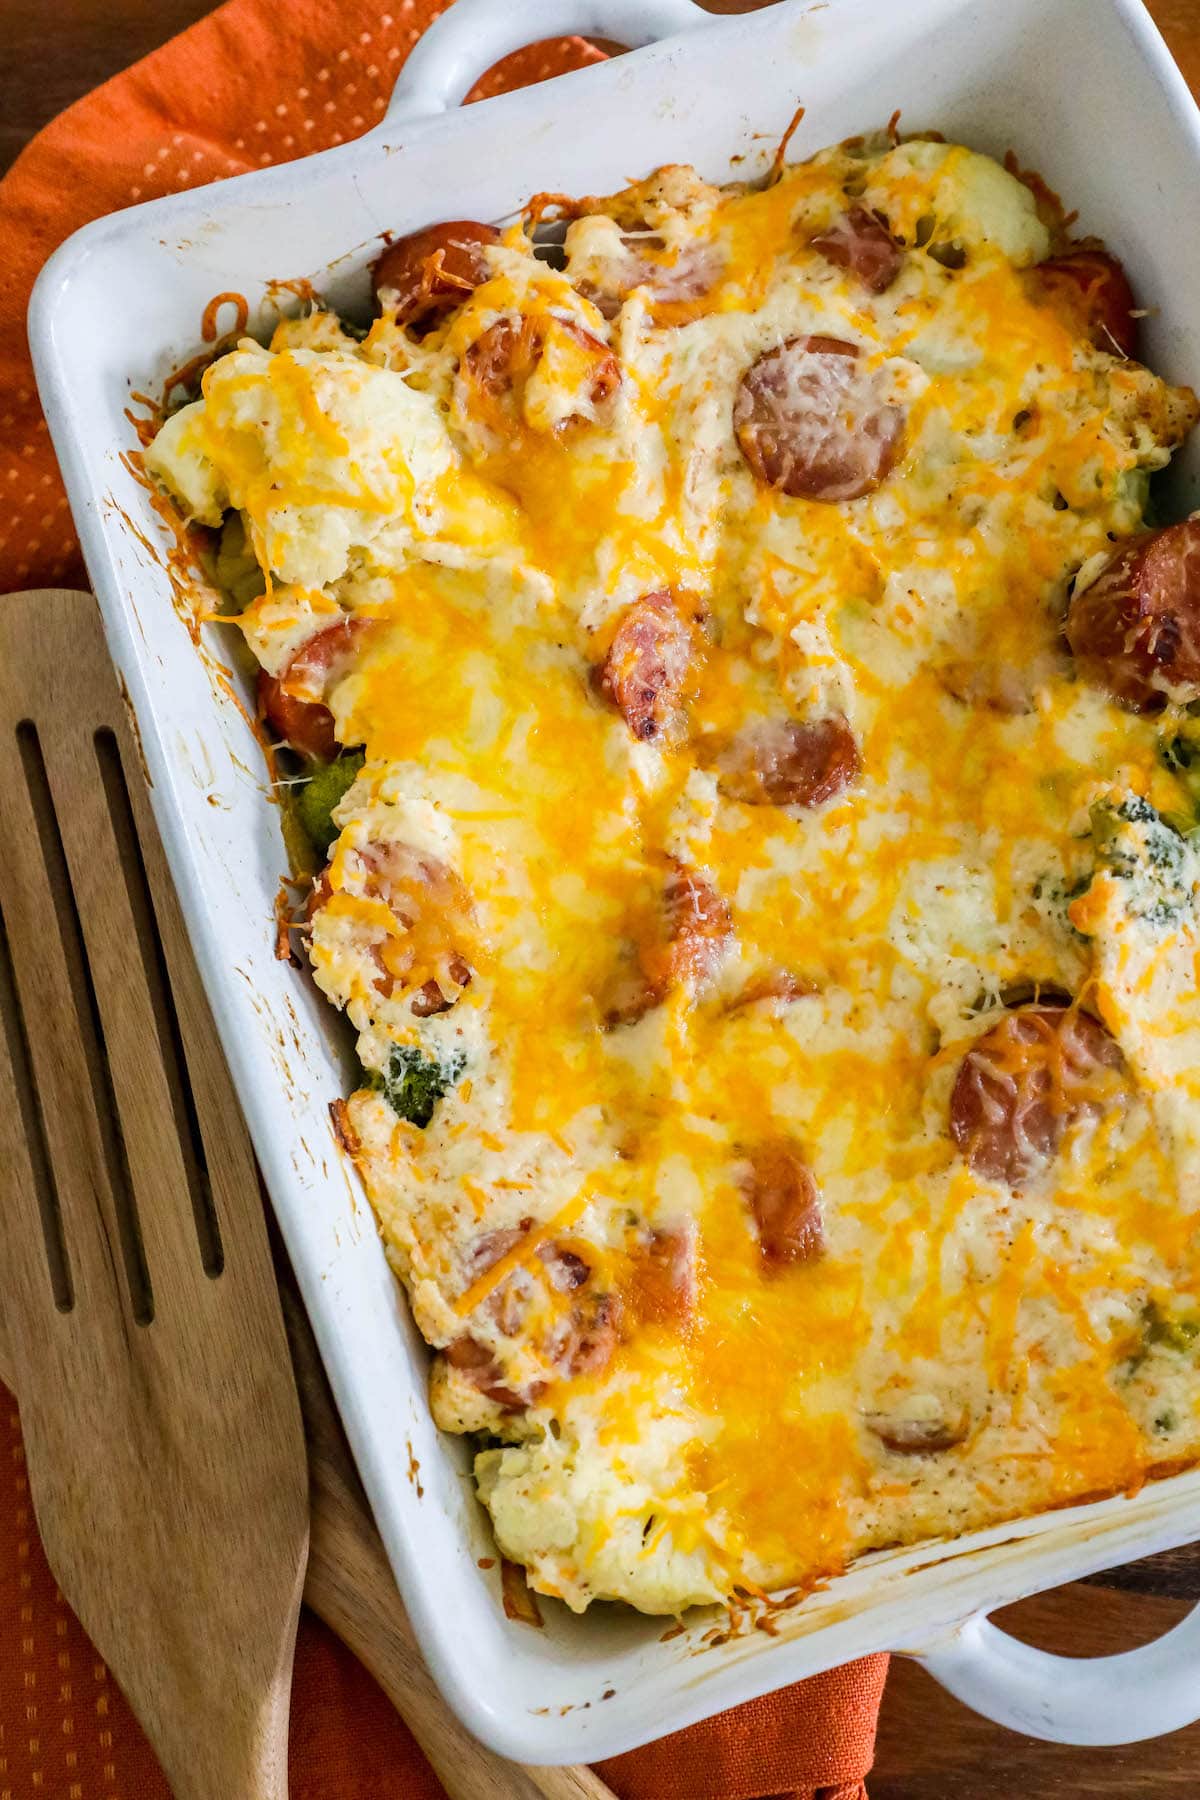 cheesy baked casserole with sliced sausage, broccoli, cauliflower, and herb seasonings in a white casserole dish on a table